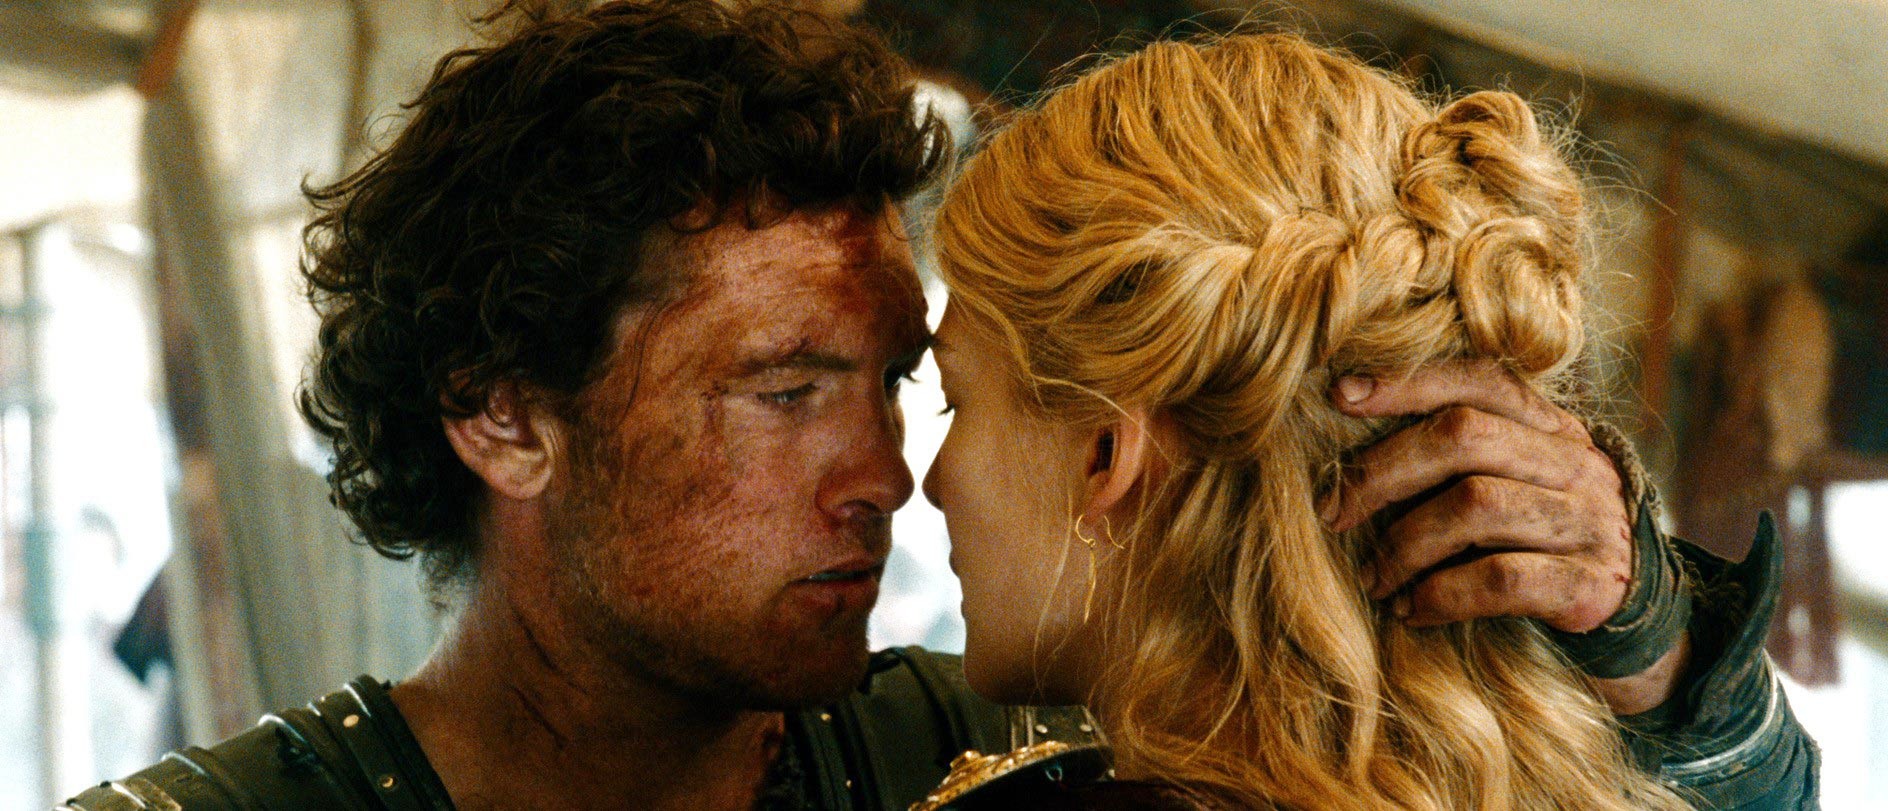 Sam Worthington stars as Perseus and Rosamund Pike stars as Andromeda in Warner Bros. Pictures' Wrath of the Titans (2012)